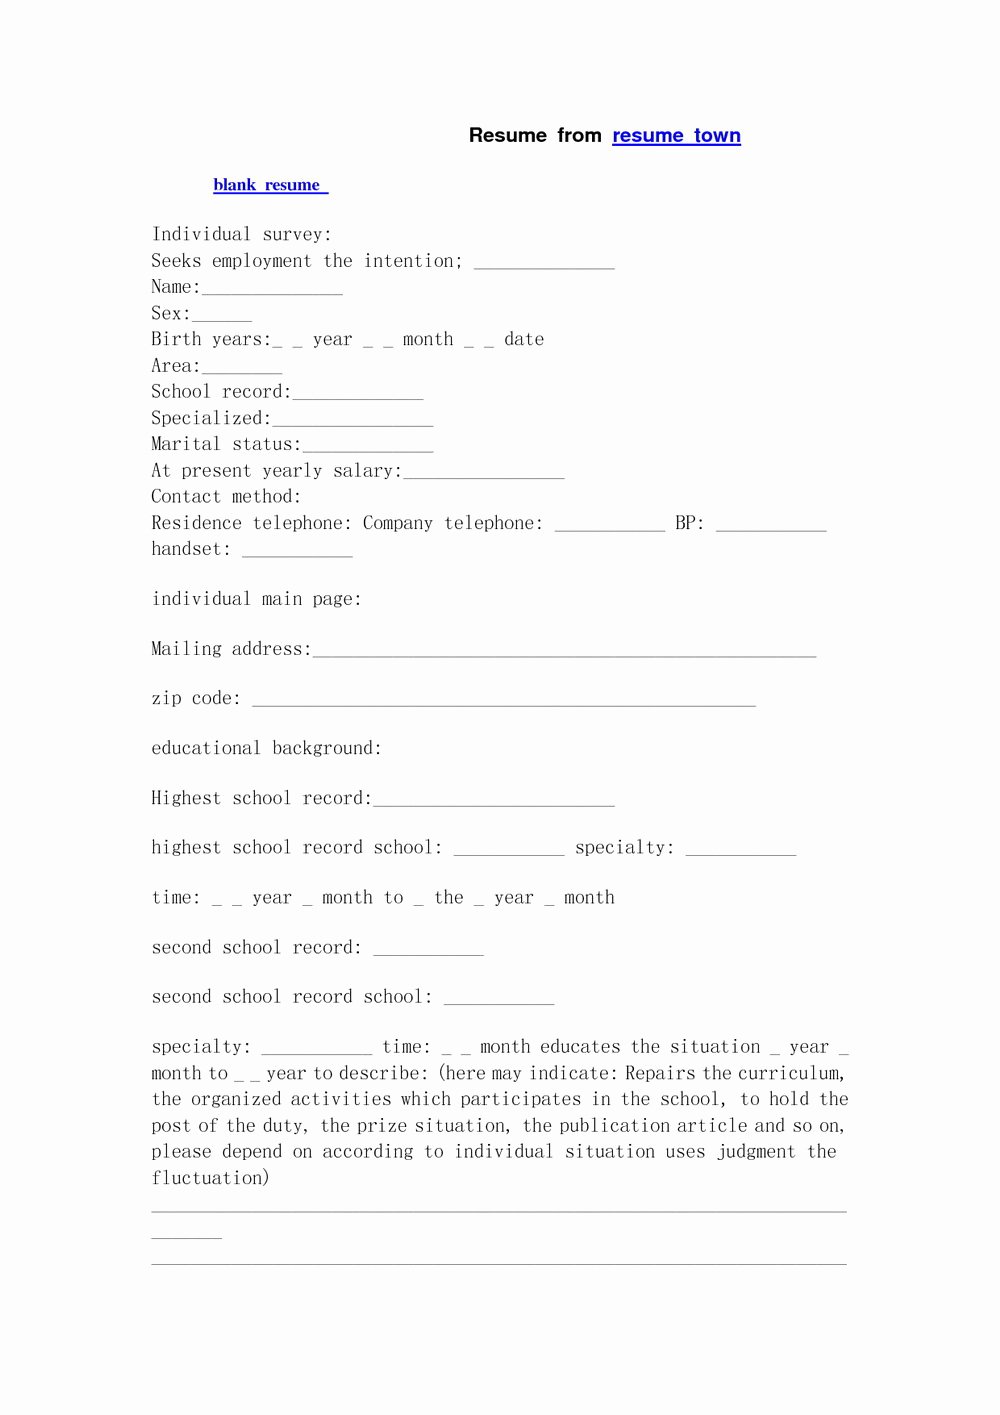 Blank Resume form for Job Application Pdf forms 6623